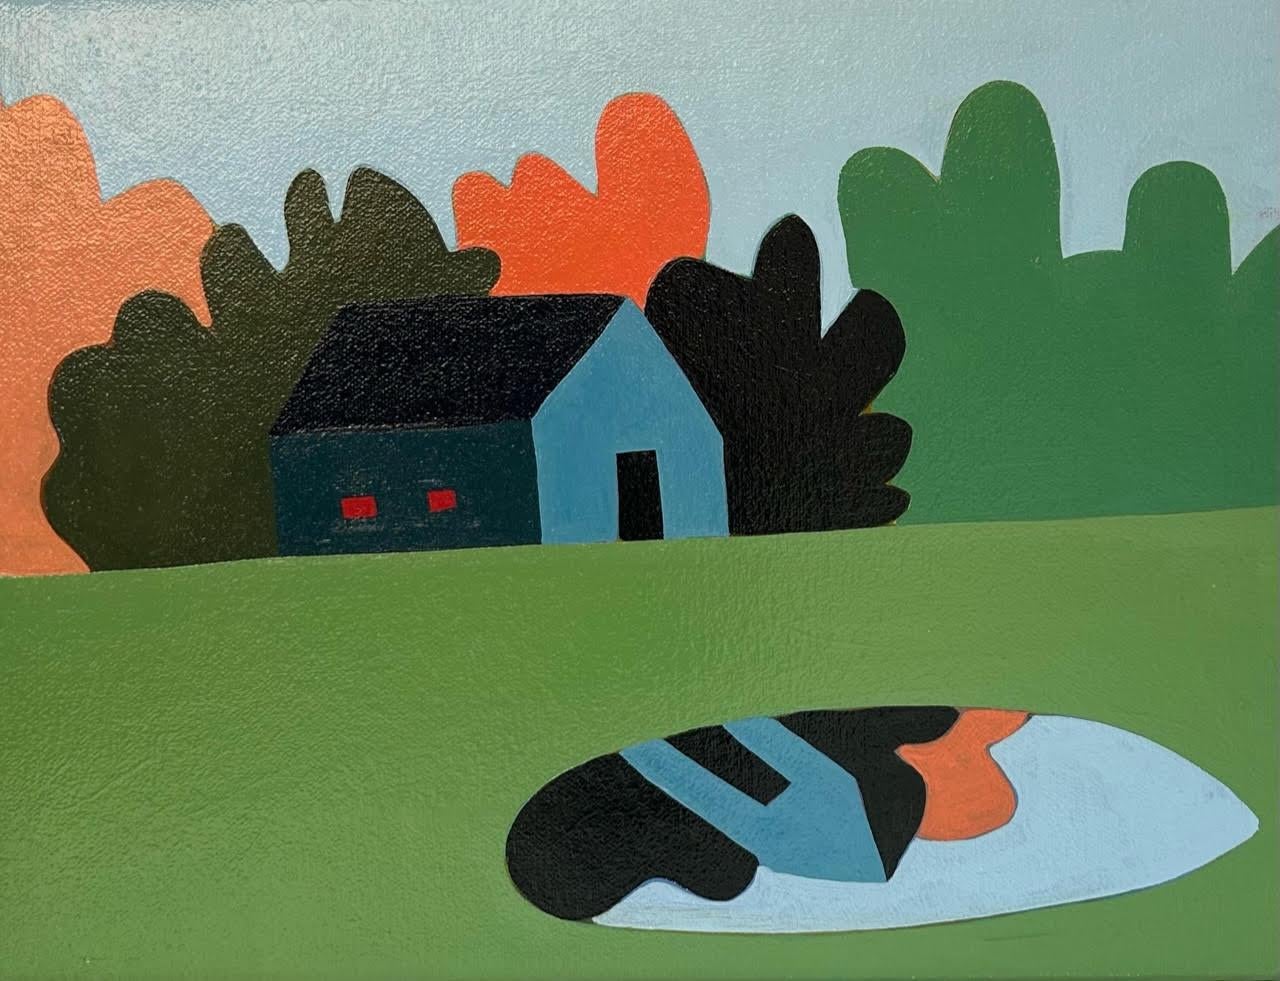 Sage Tucker-Ketcham Landscape Painting - "Blue House with Puddle" contemporary small scale oil painting, orange, green